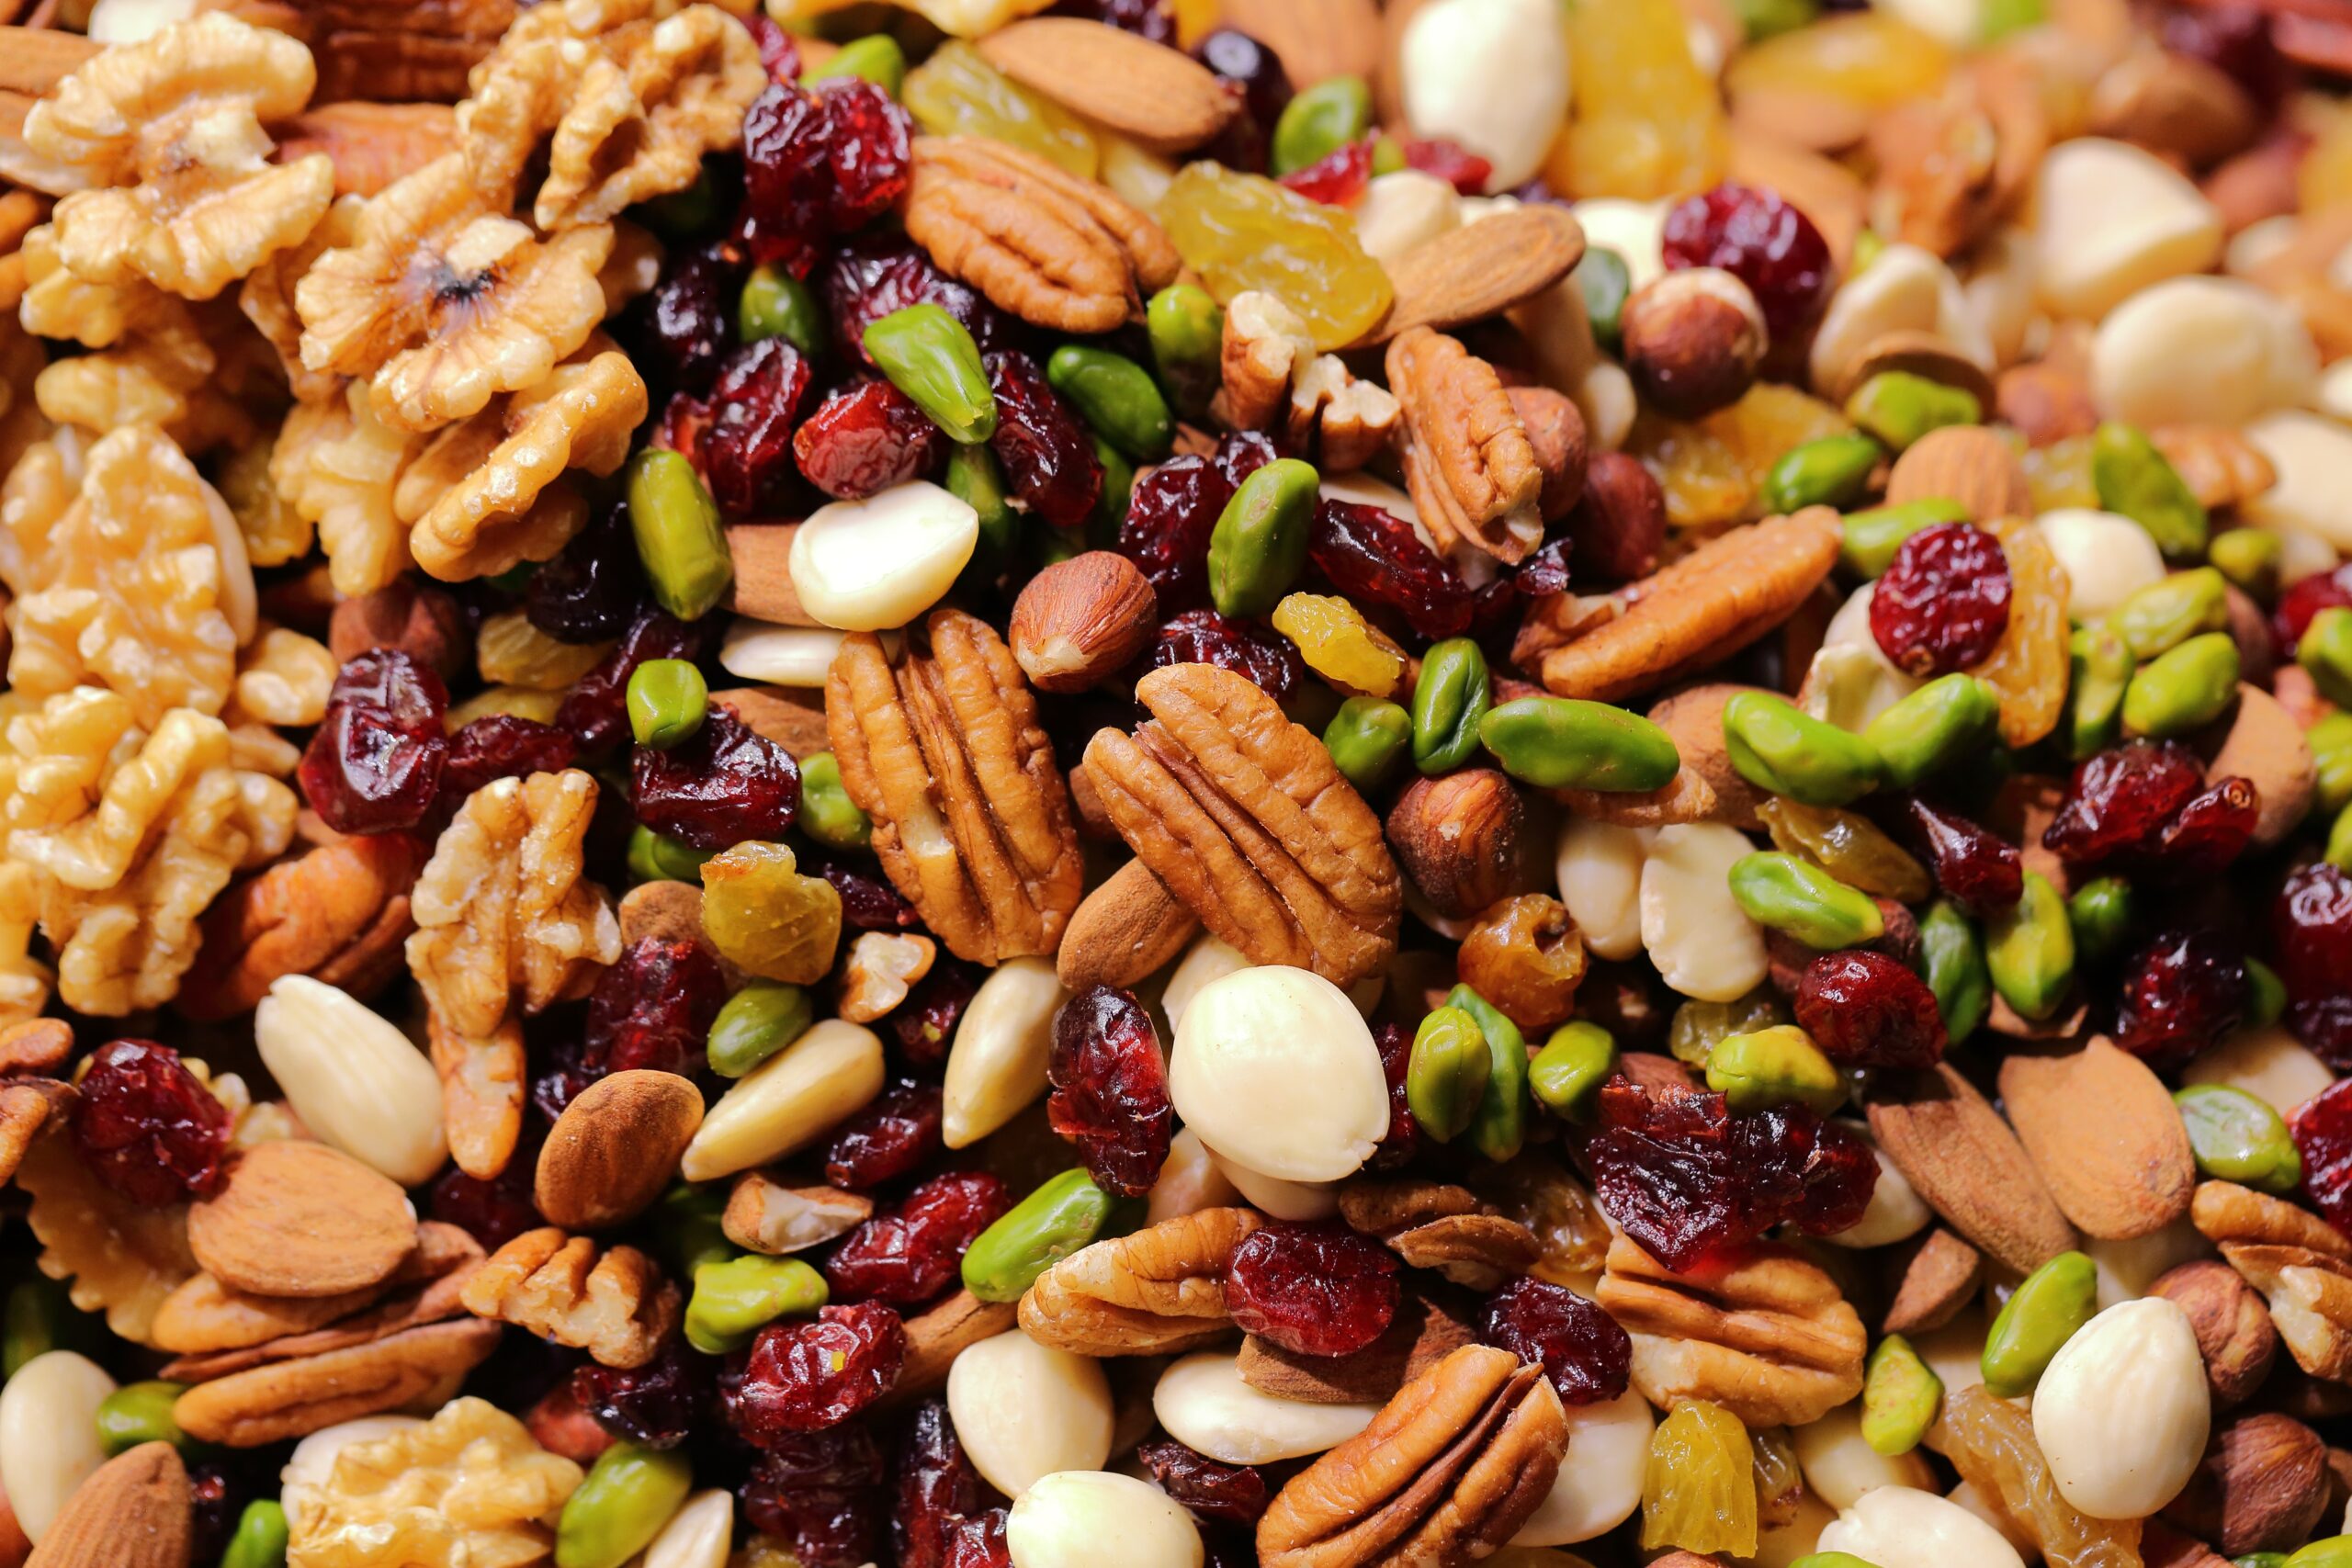 Almonds, Cashews And More